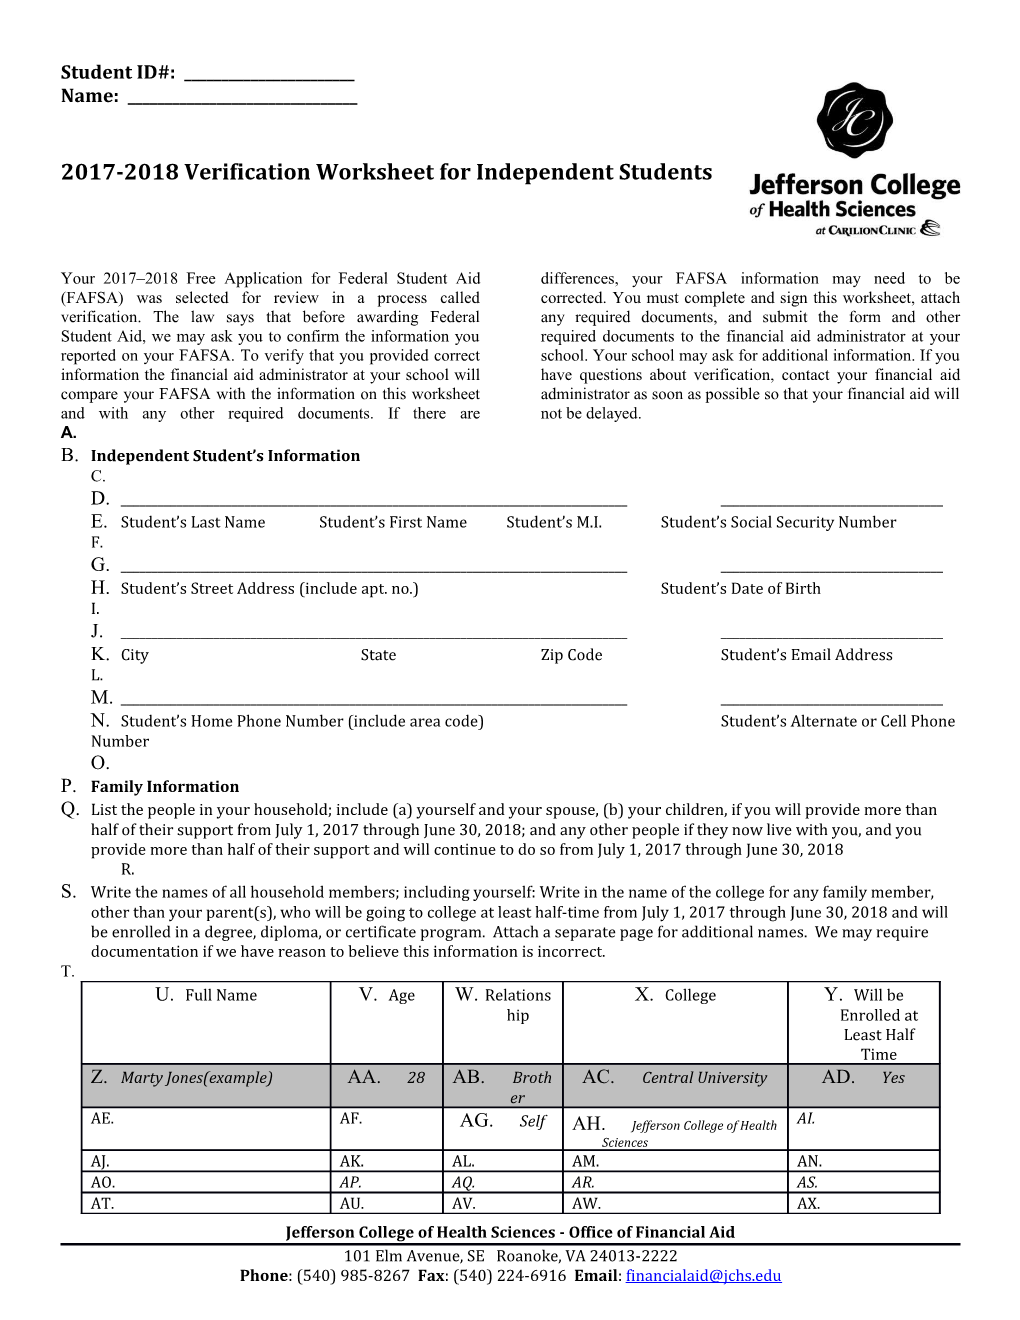 2017-2018 Verification Work Sheet for Independent Students